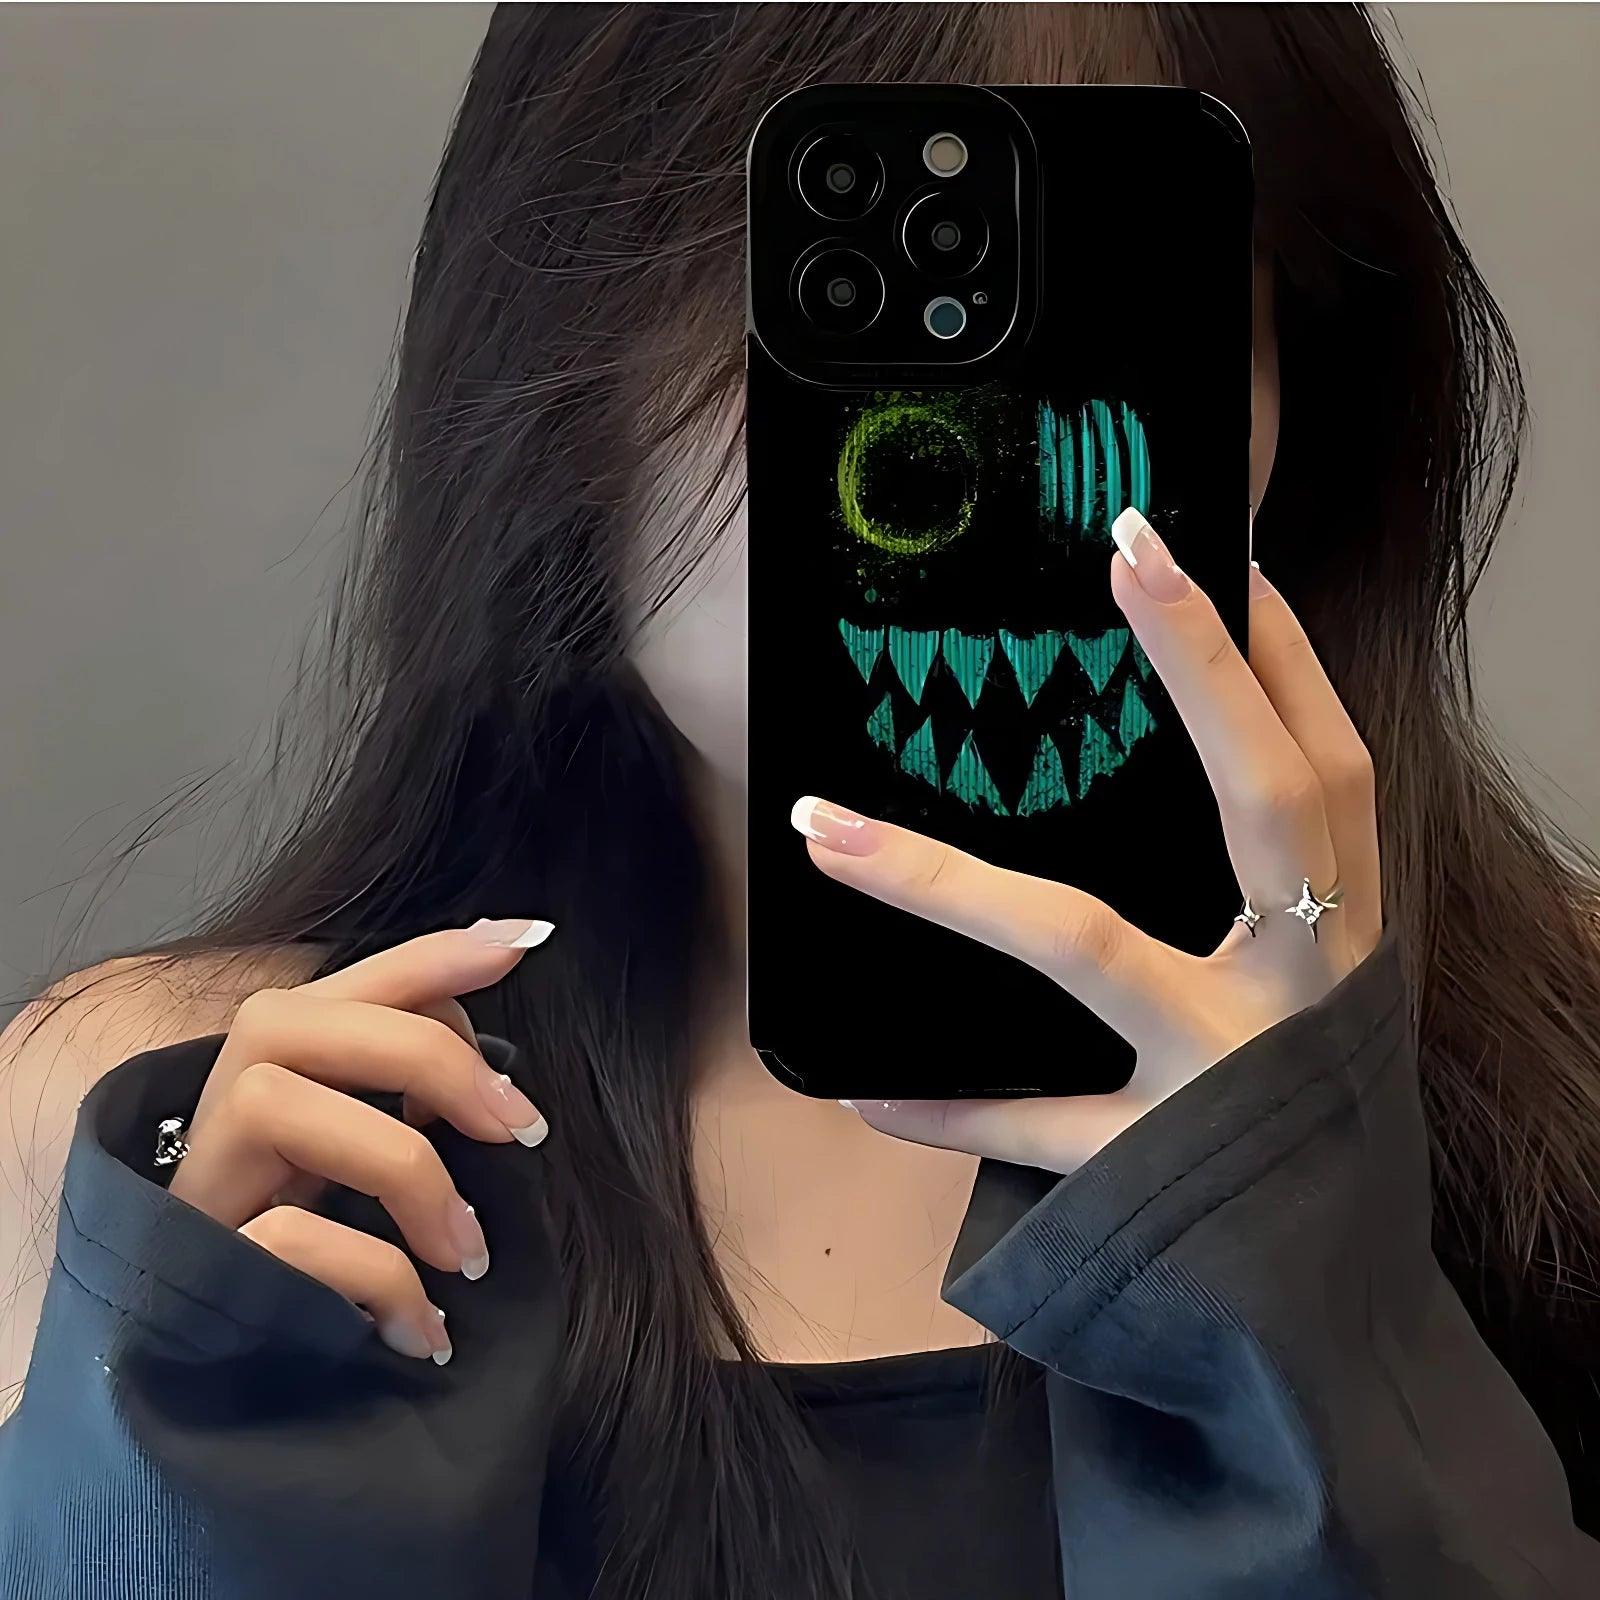 Black Smiley Ghost Cute Phone Case for iPhone 14, 13 Pro Max, 12, 11, X, XS, XR, SE 2, 6, 6S, 7, 8 Plus - Funny Cover - Touchy Style .